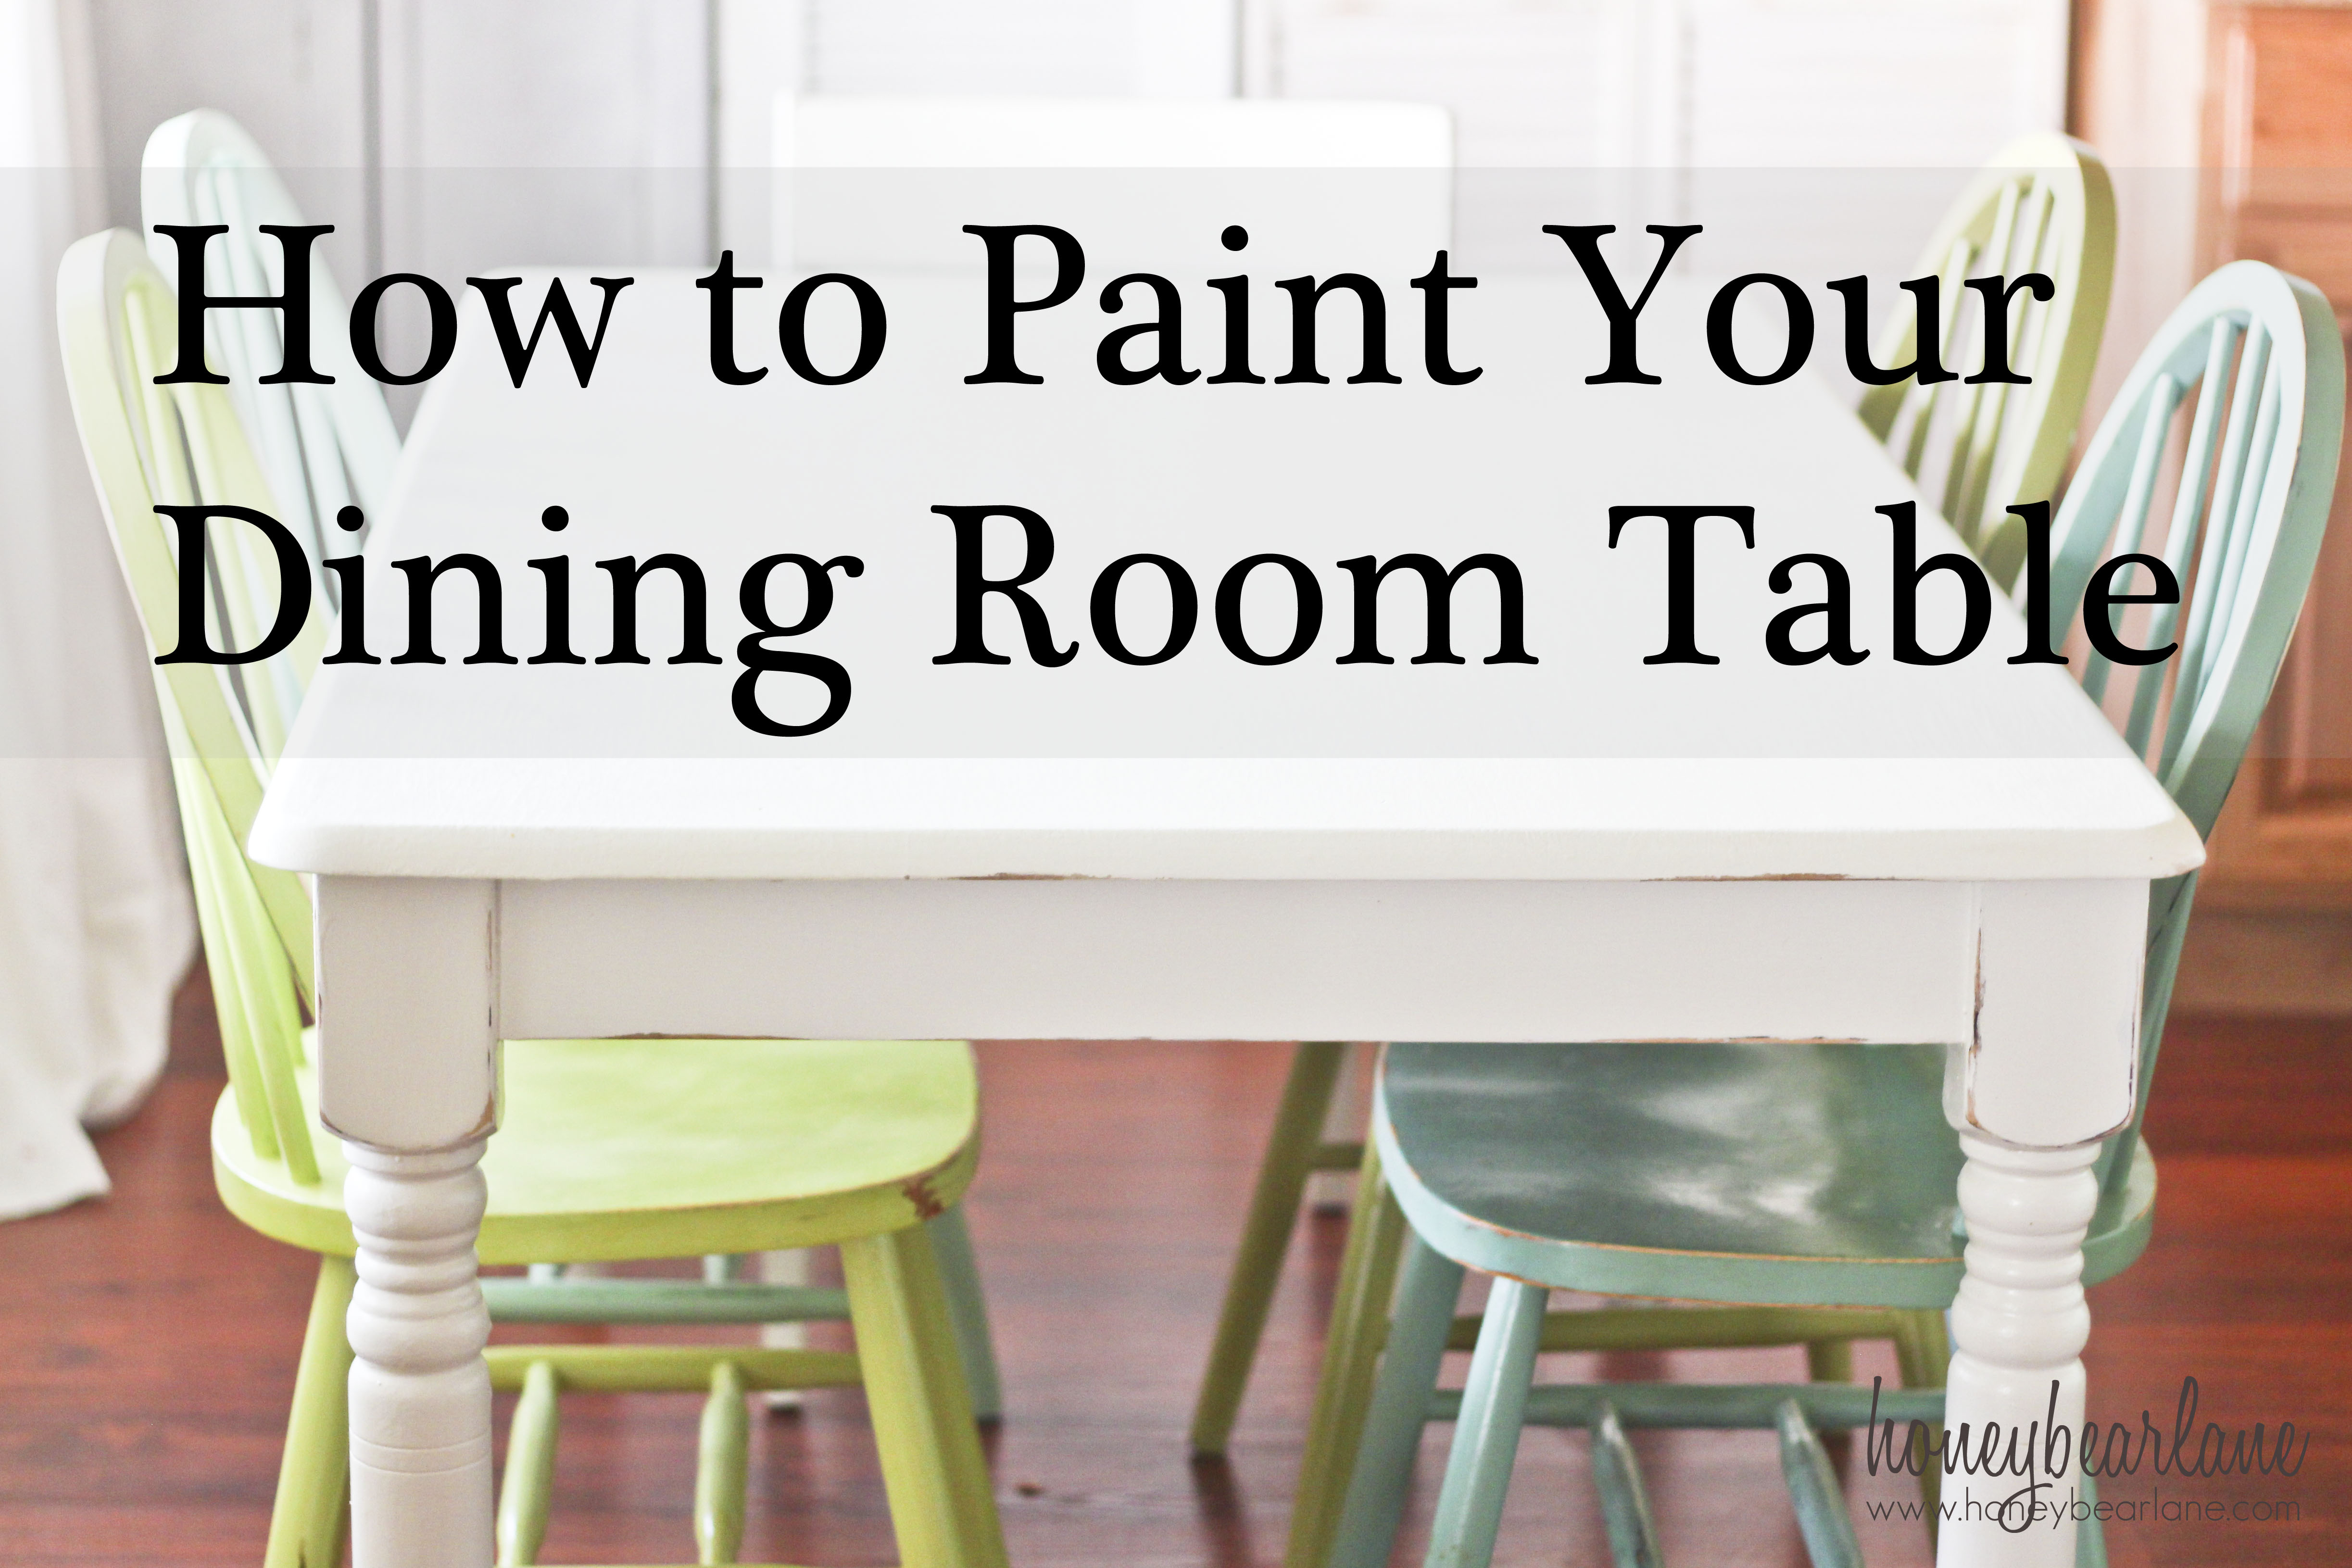 Child Got Paint On Dining Room Table